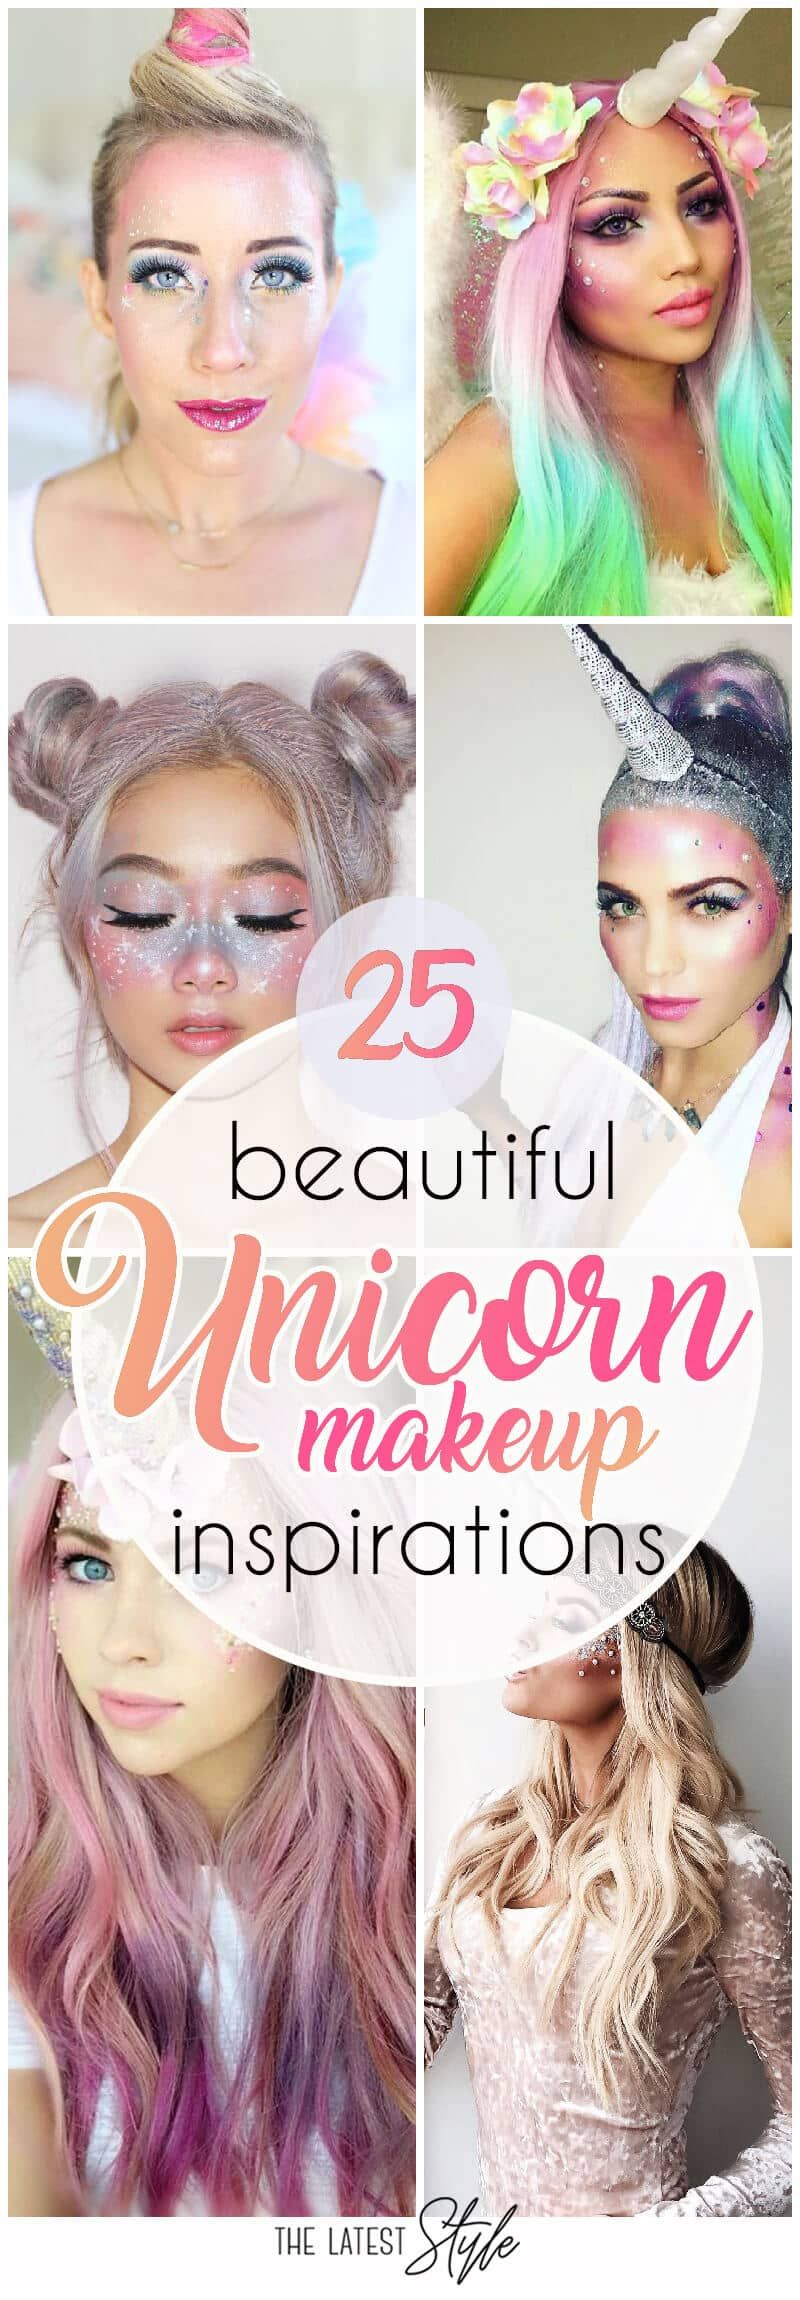 25 Ways to be the Queen of Unicorn Makeup